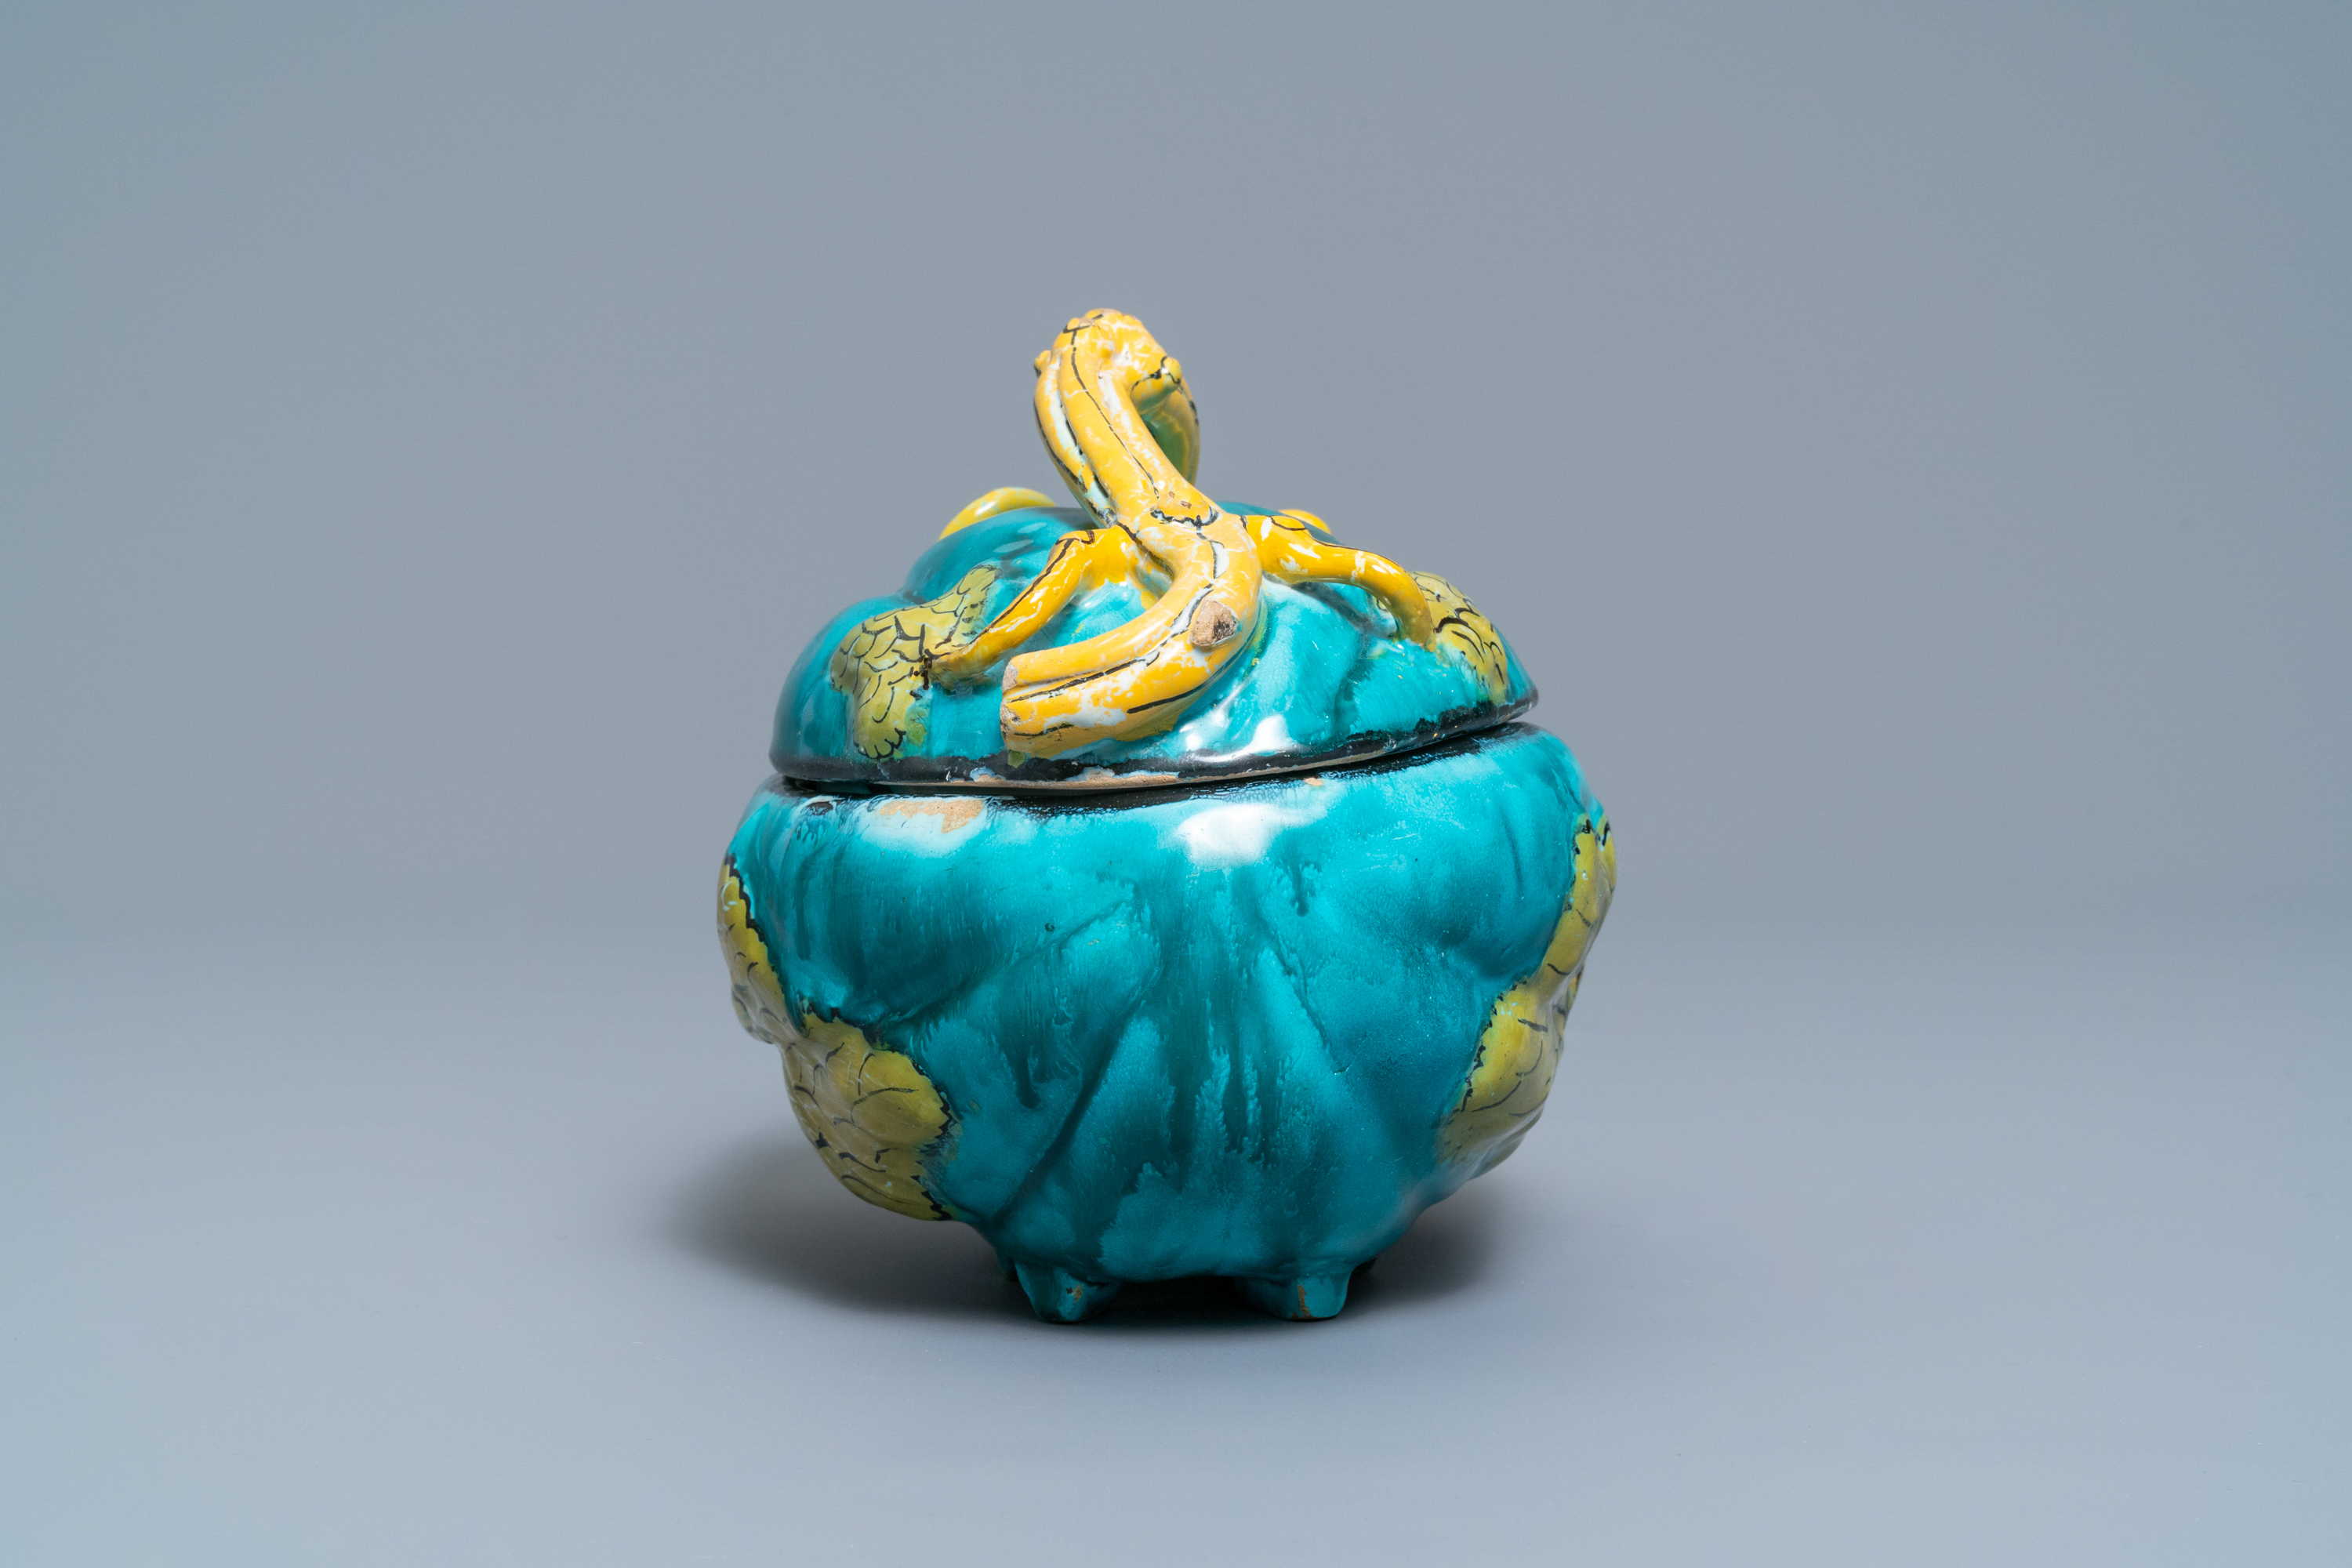 A polychrome Brussels faience melon-shaped tureen and cover, 18th C. - Image 5 of 7